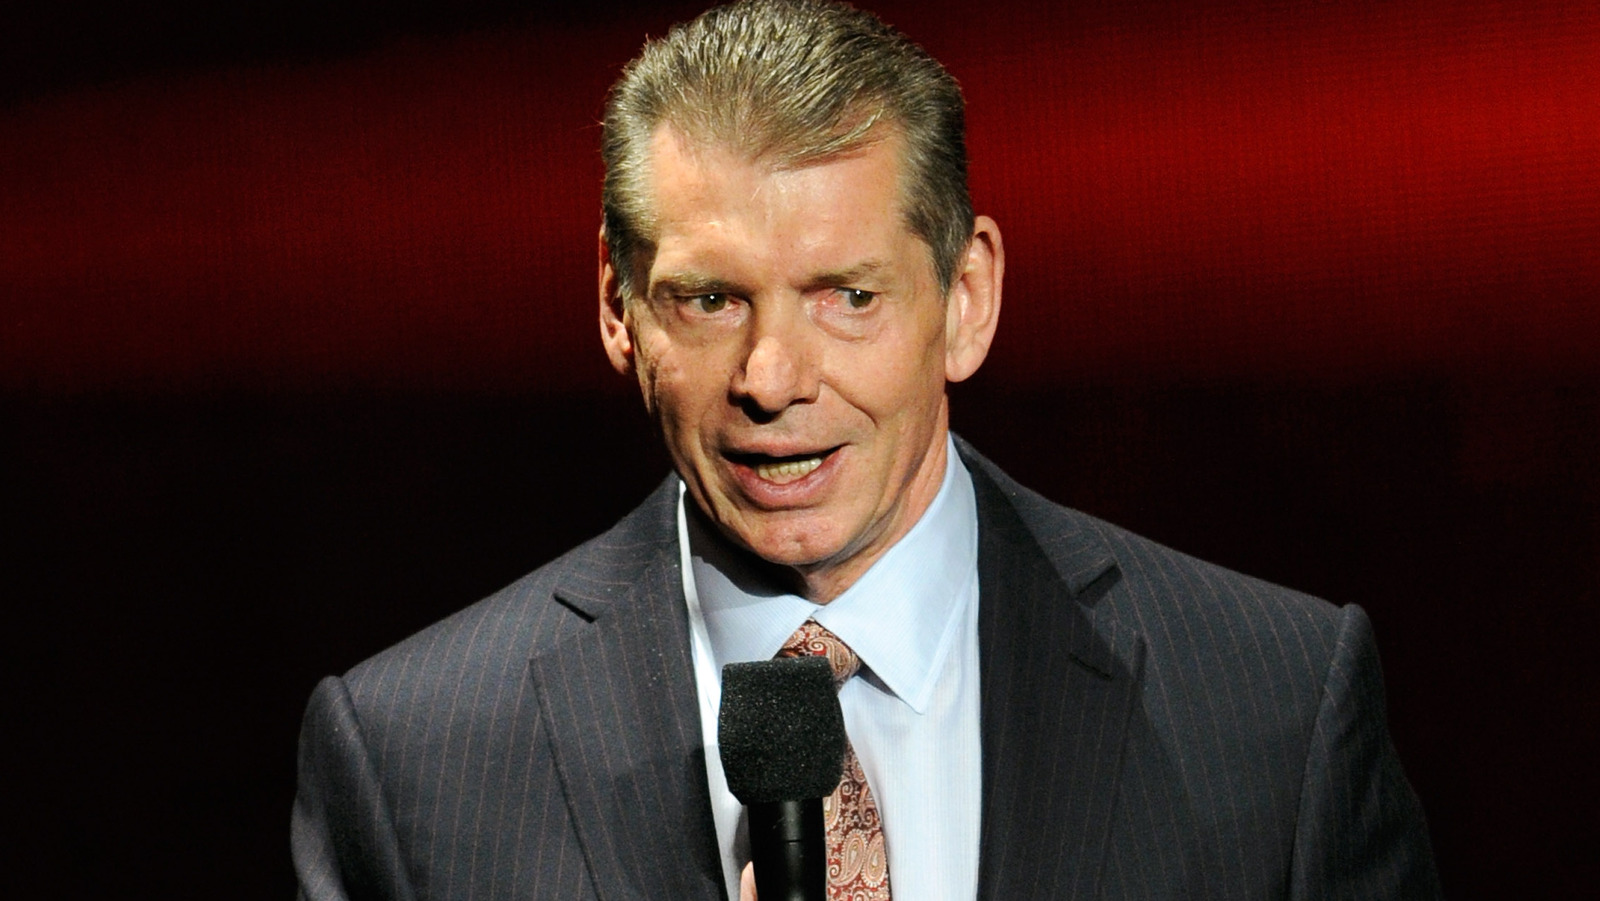 Former Wrestler Alleges He Was Propositioned By WWE Official, Informed Vince McMahon